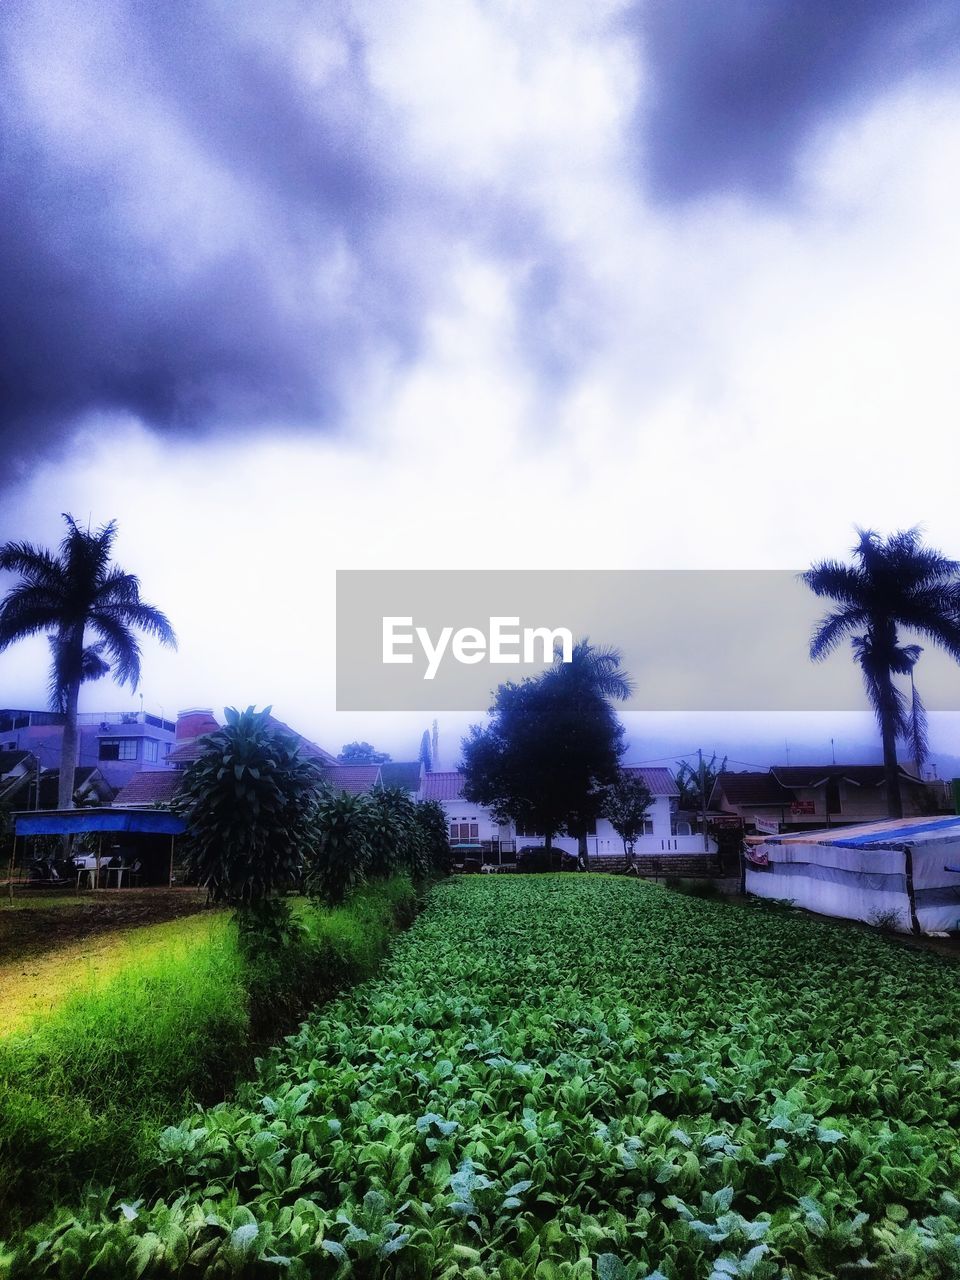 plant, sky, tree, cloud, nature, grass, growth, palm tree, beauty in nature, flower, sunlight, tropical climate, land, no people, green, tranquility, field, scenics - nature, environment, morning, tranquil scene, outdoors, landscape, agriculture, day, leaf, horizon